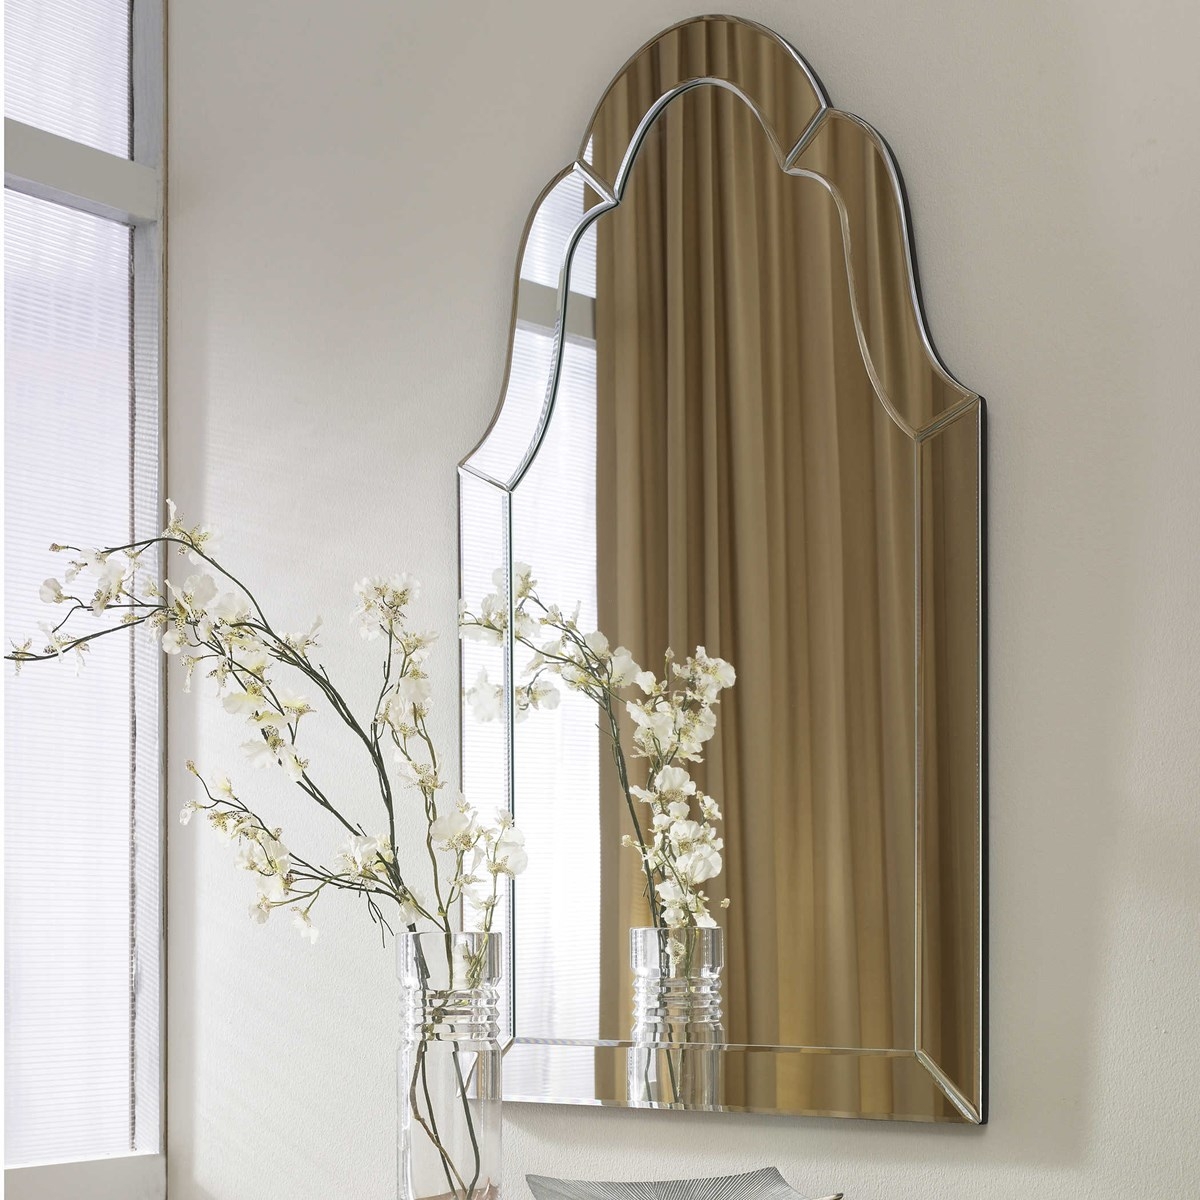 Hovan Frameless Arched Mirror - Image 1